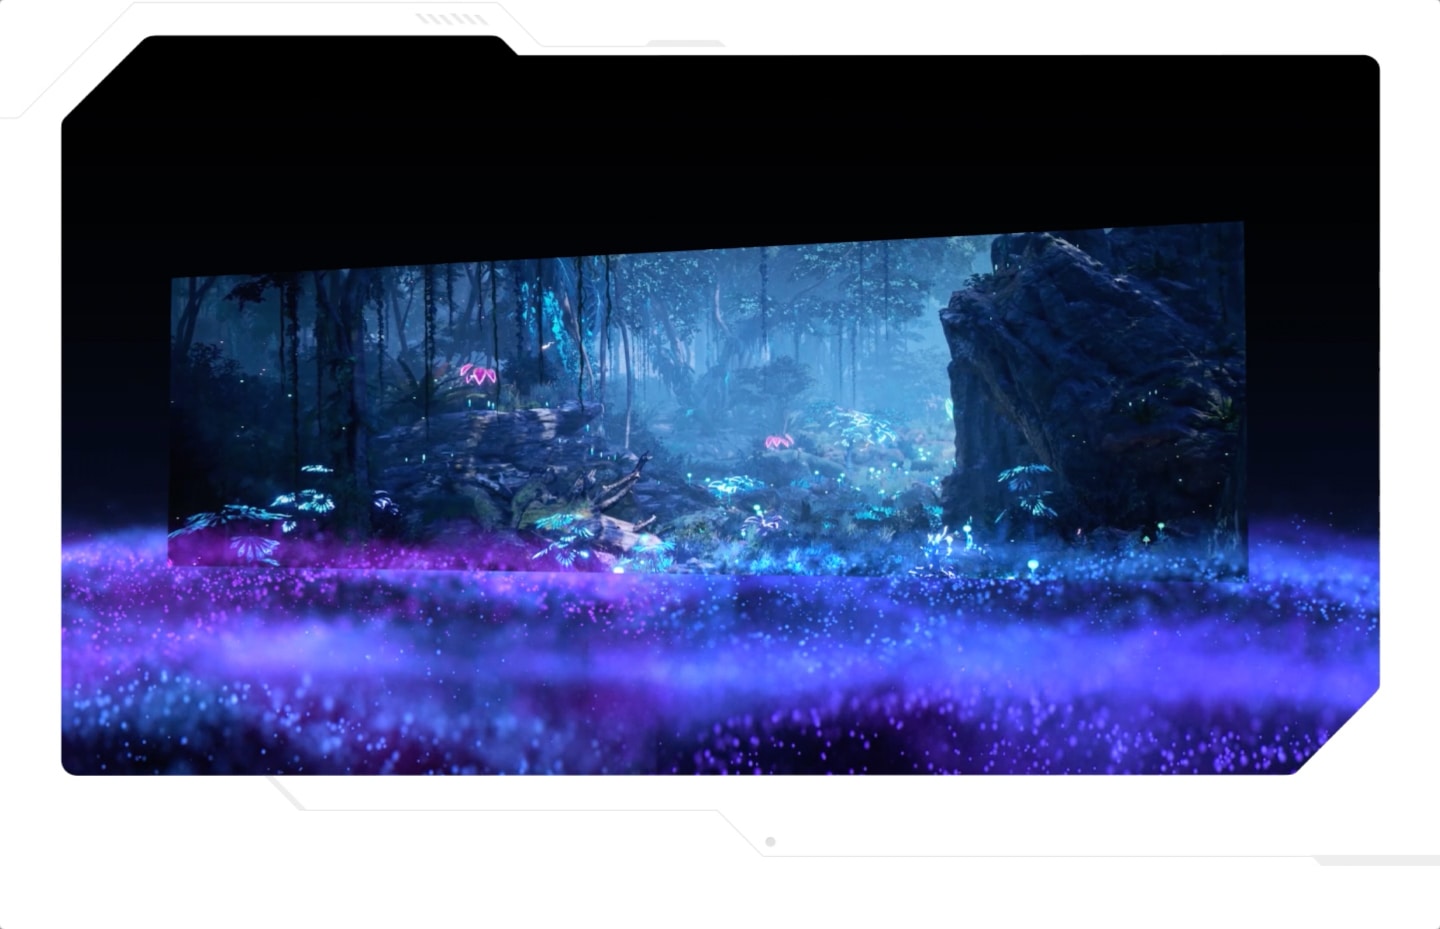 Samsung Neo Quantum Processor Pro is shown with the square chip label in the middle. And it transitions to show a nighttime scene in the forest on the screen, zooming out on a misty jungle surrounded by trees. The screen is angled to the left.